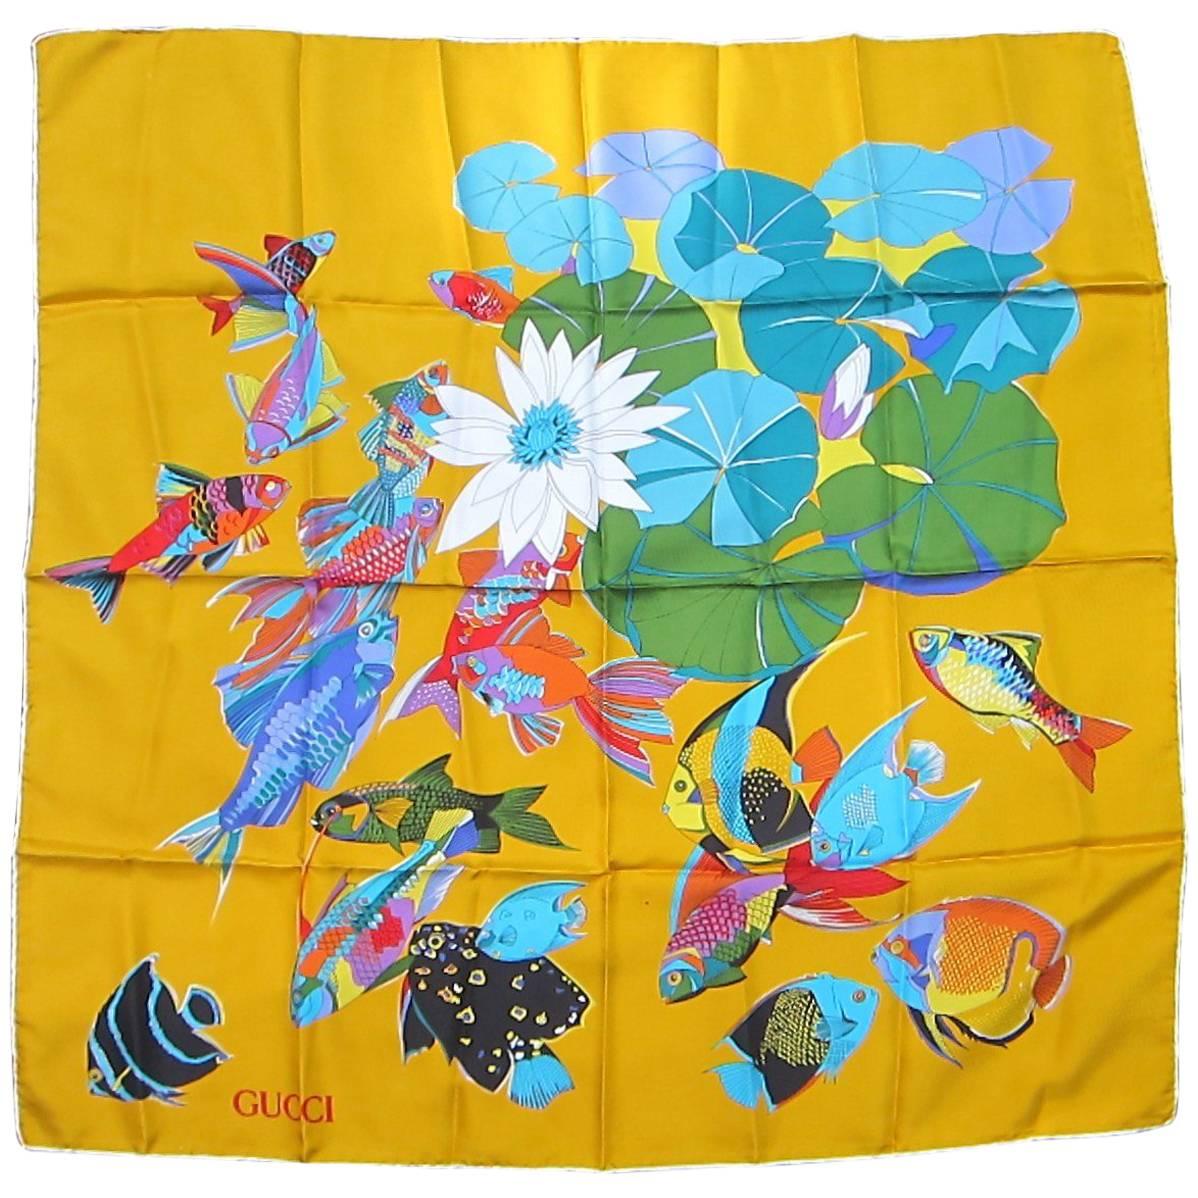 Gucci Silk Scarf "Under The Sea" Vintage New Never worn 1990s Old Stock 